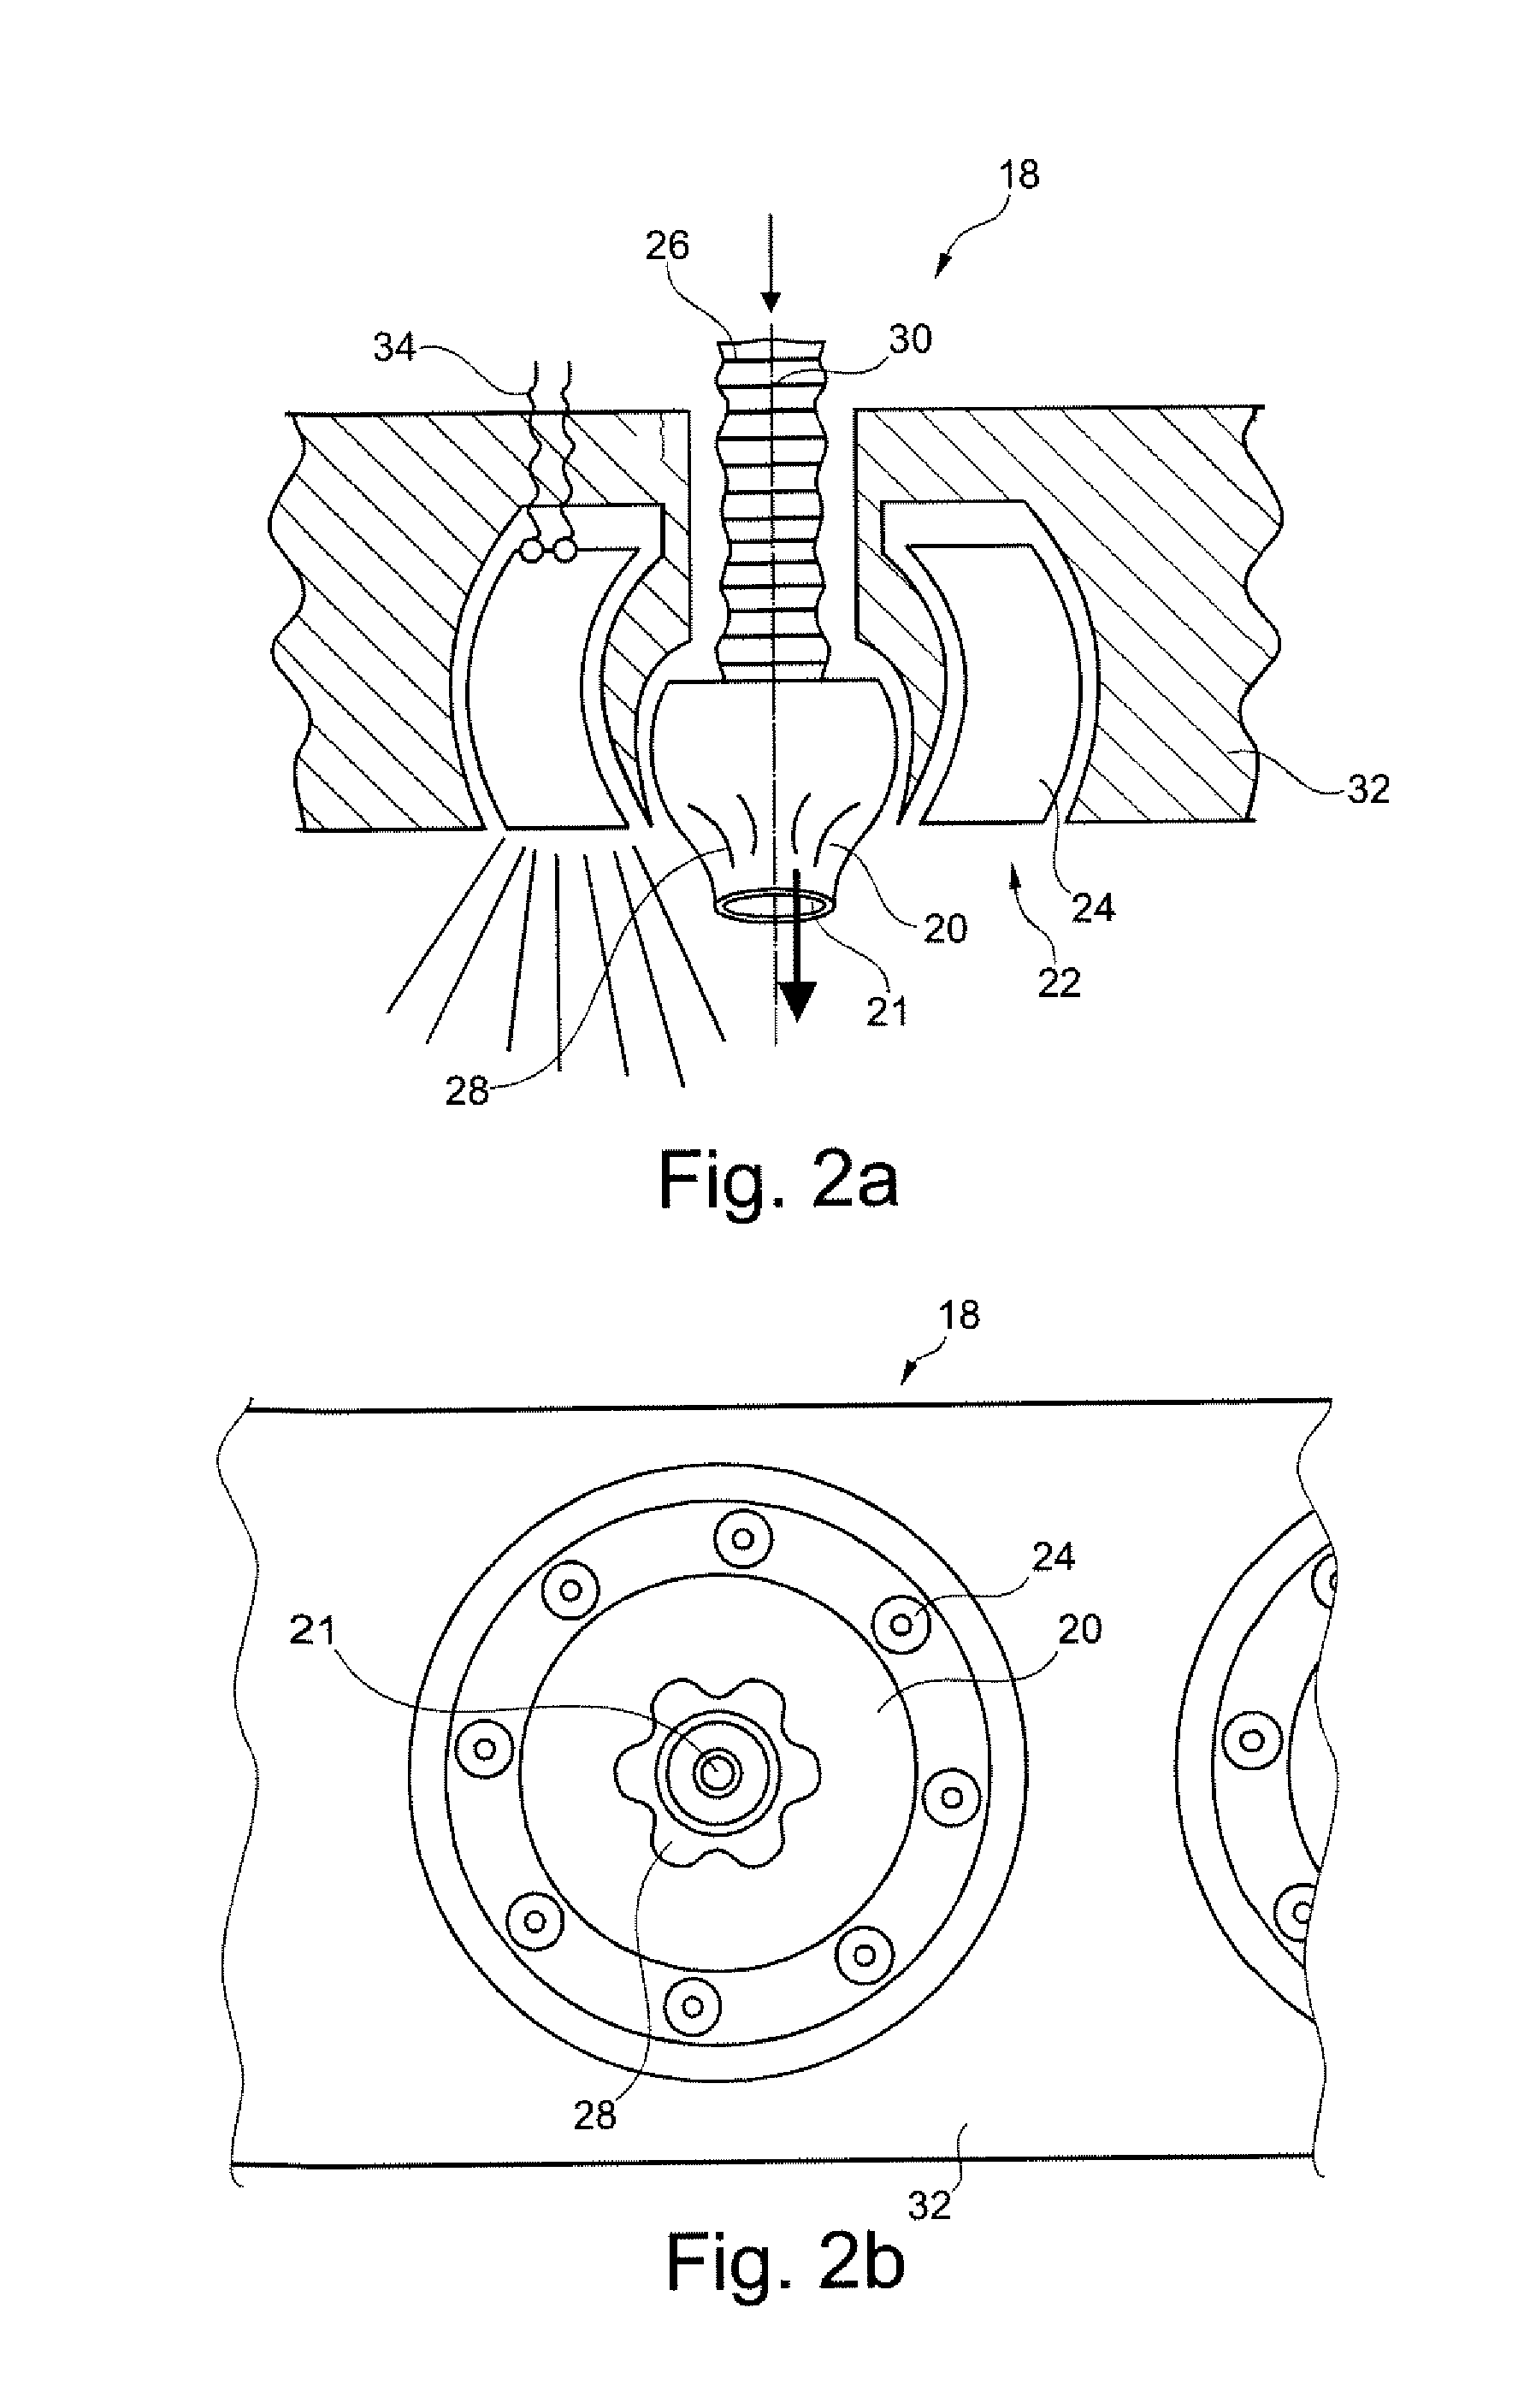 Service apparatus for a transportation means